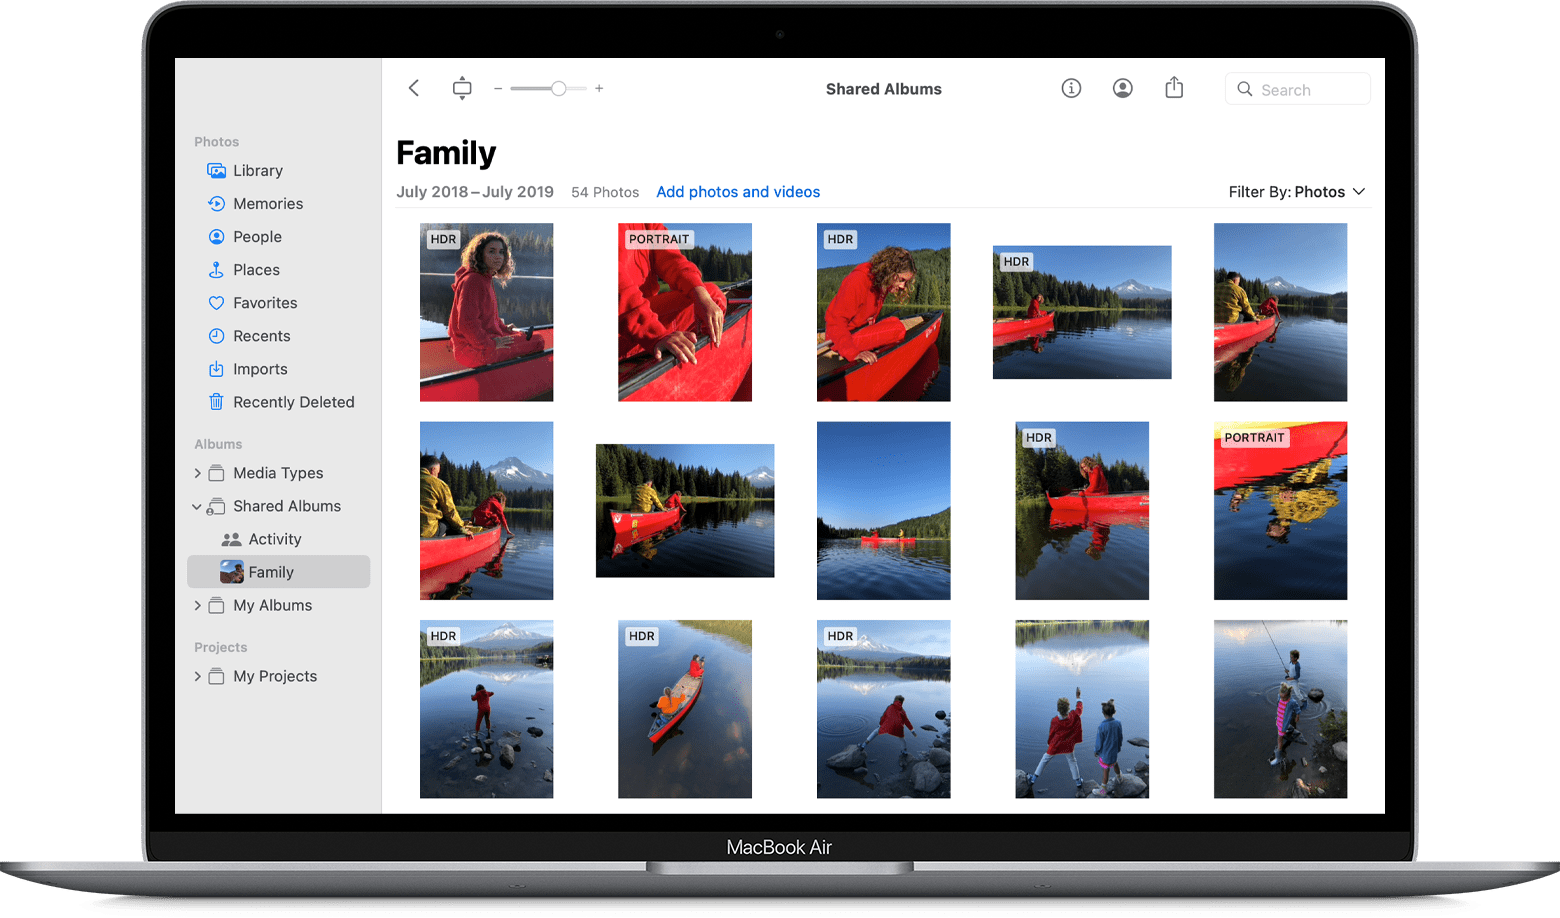 MacBook Air with Photos app showing a shared family album